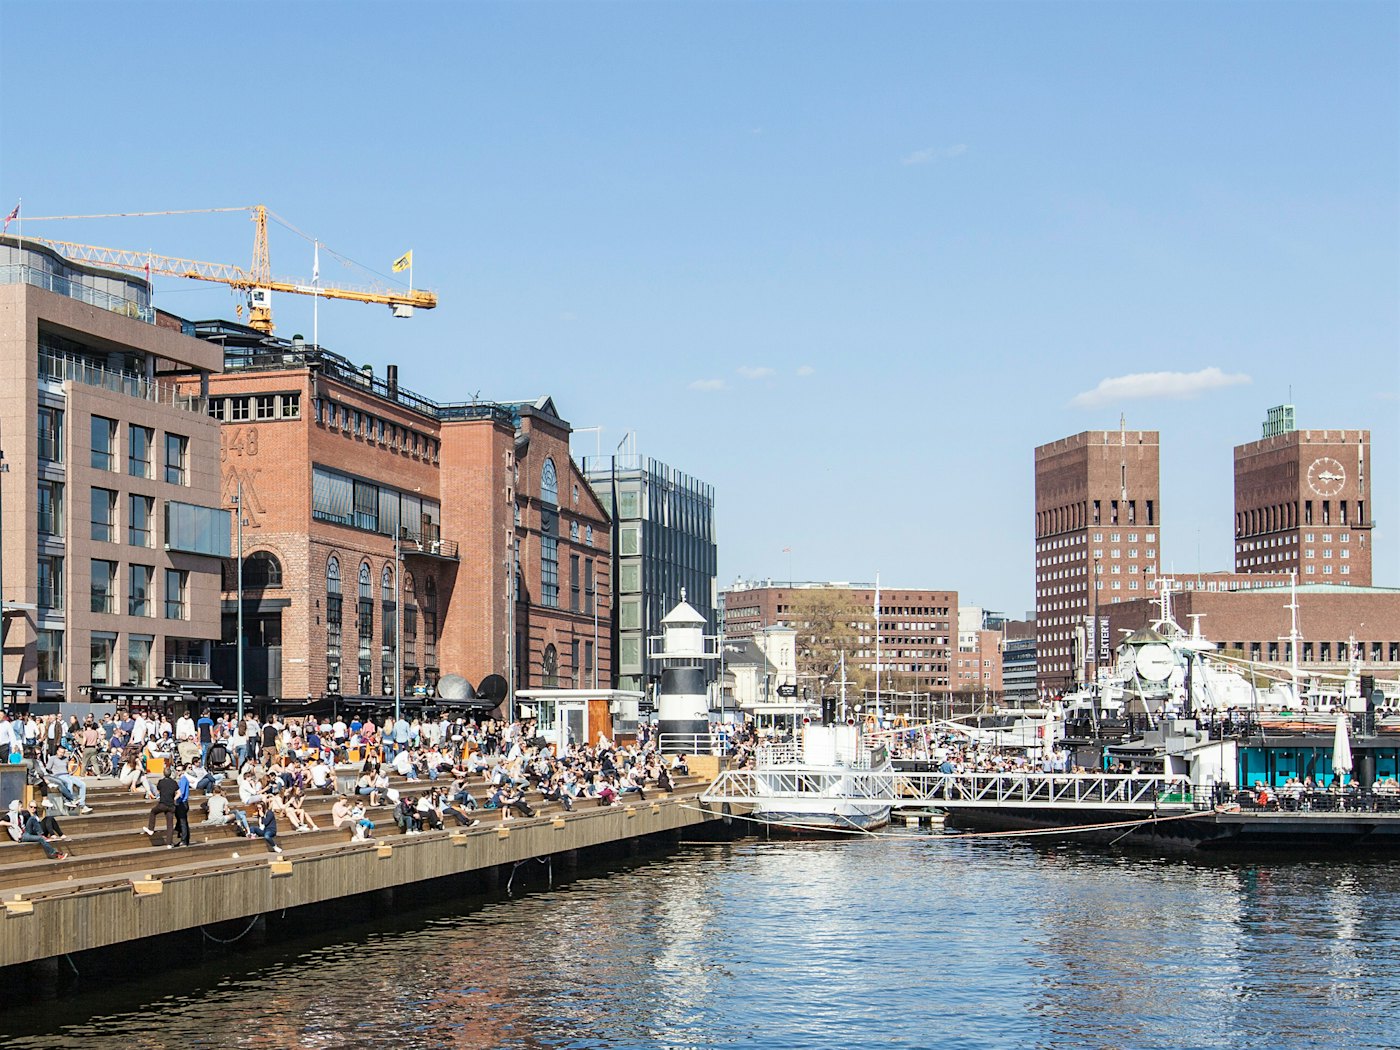 Hot summer day at Aker brygge with lots of people